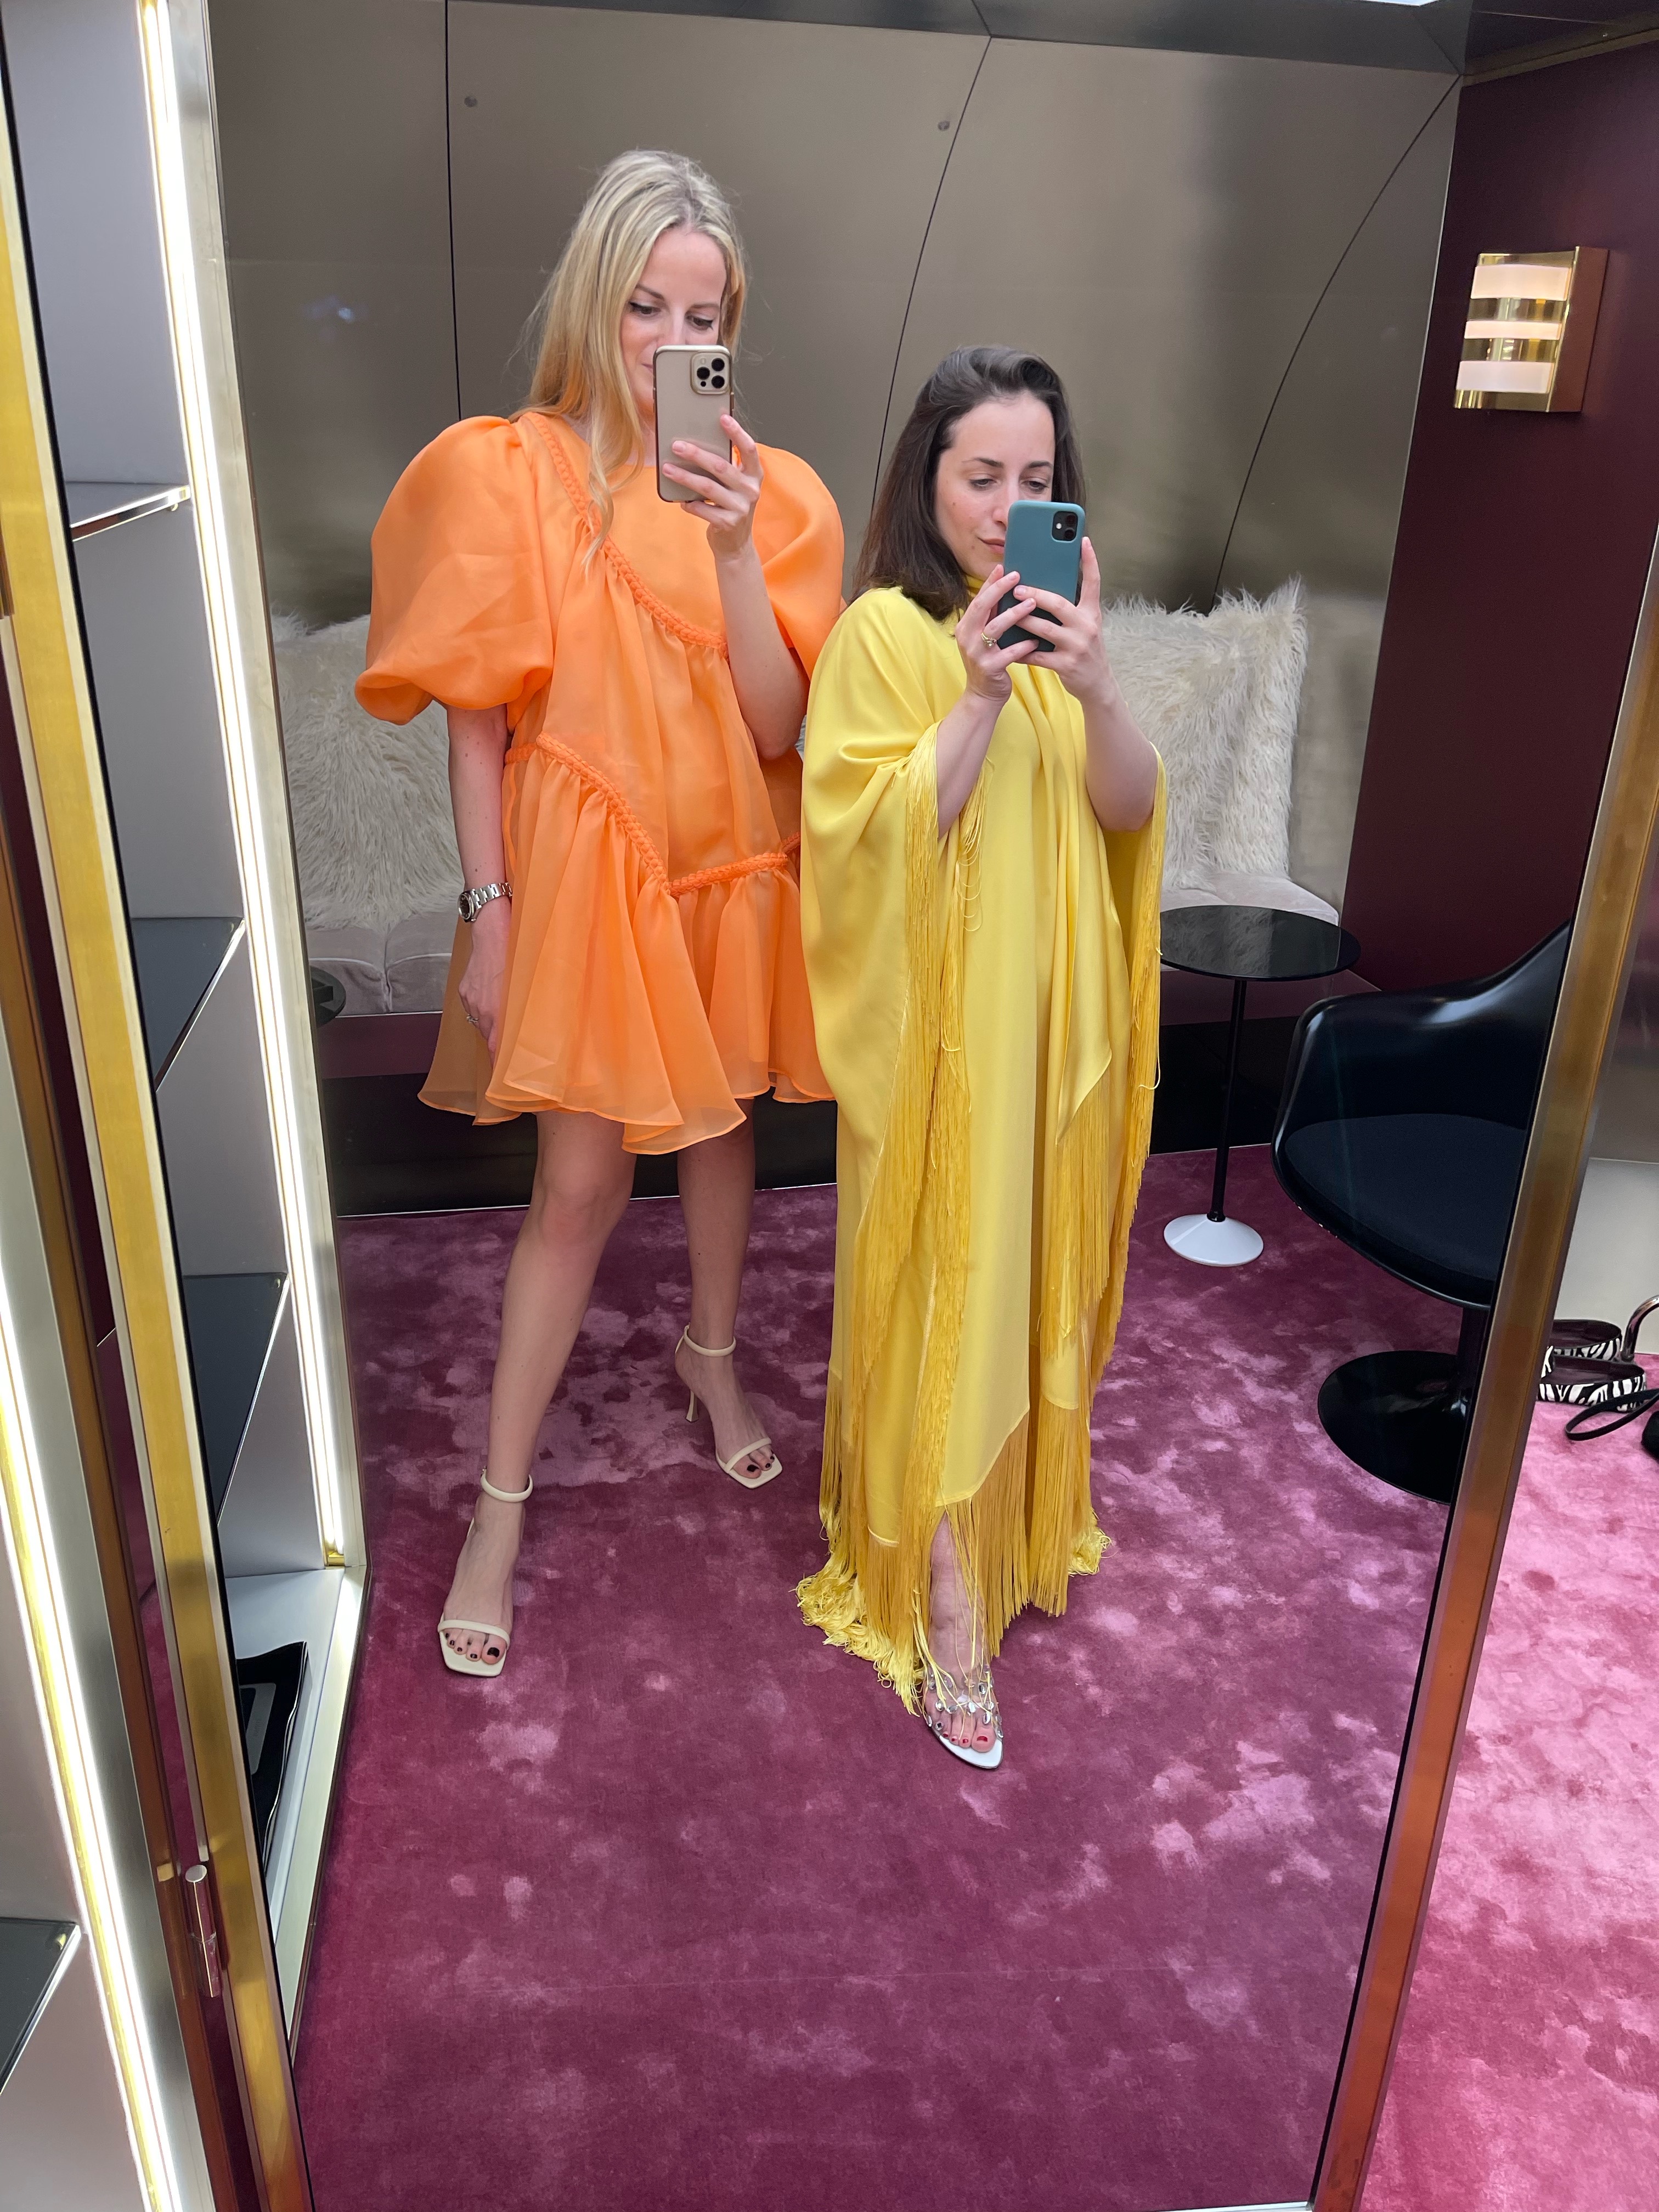 I’m Tall, She’s Short and We Just Tried On the Best Summer Dresses for Both Us